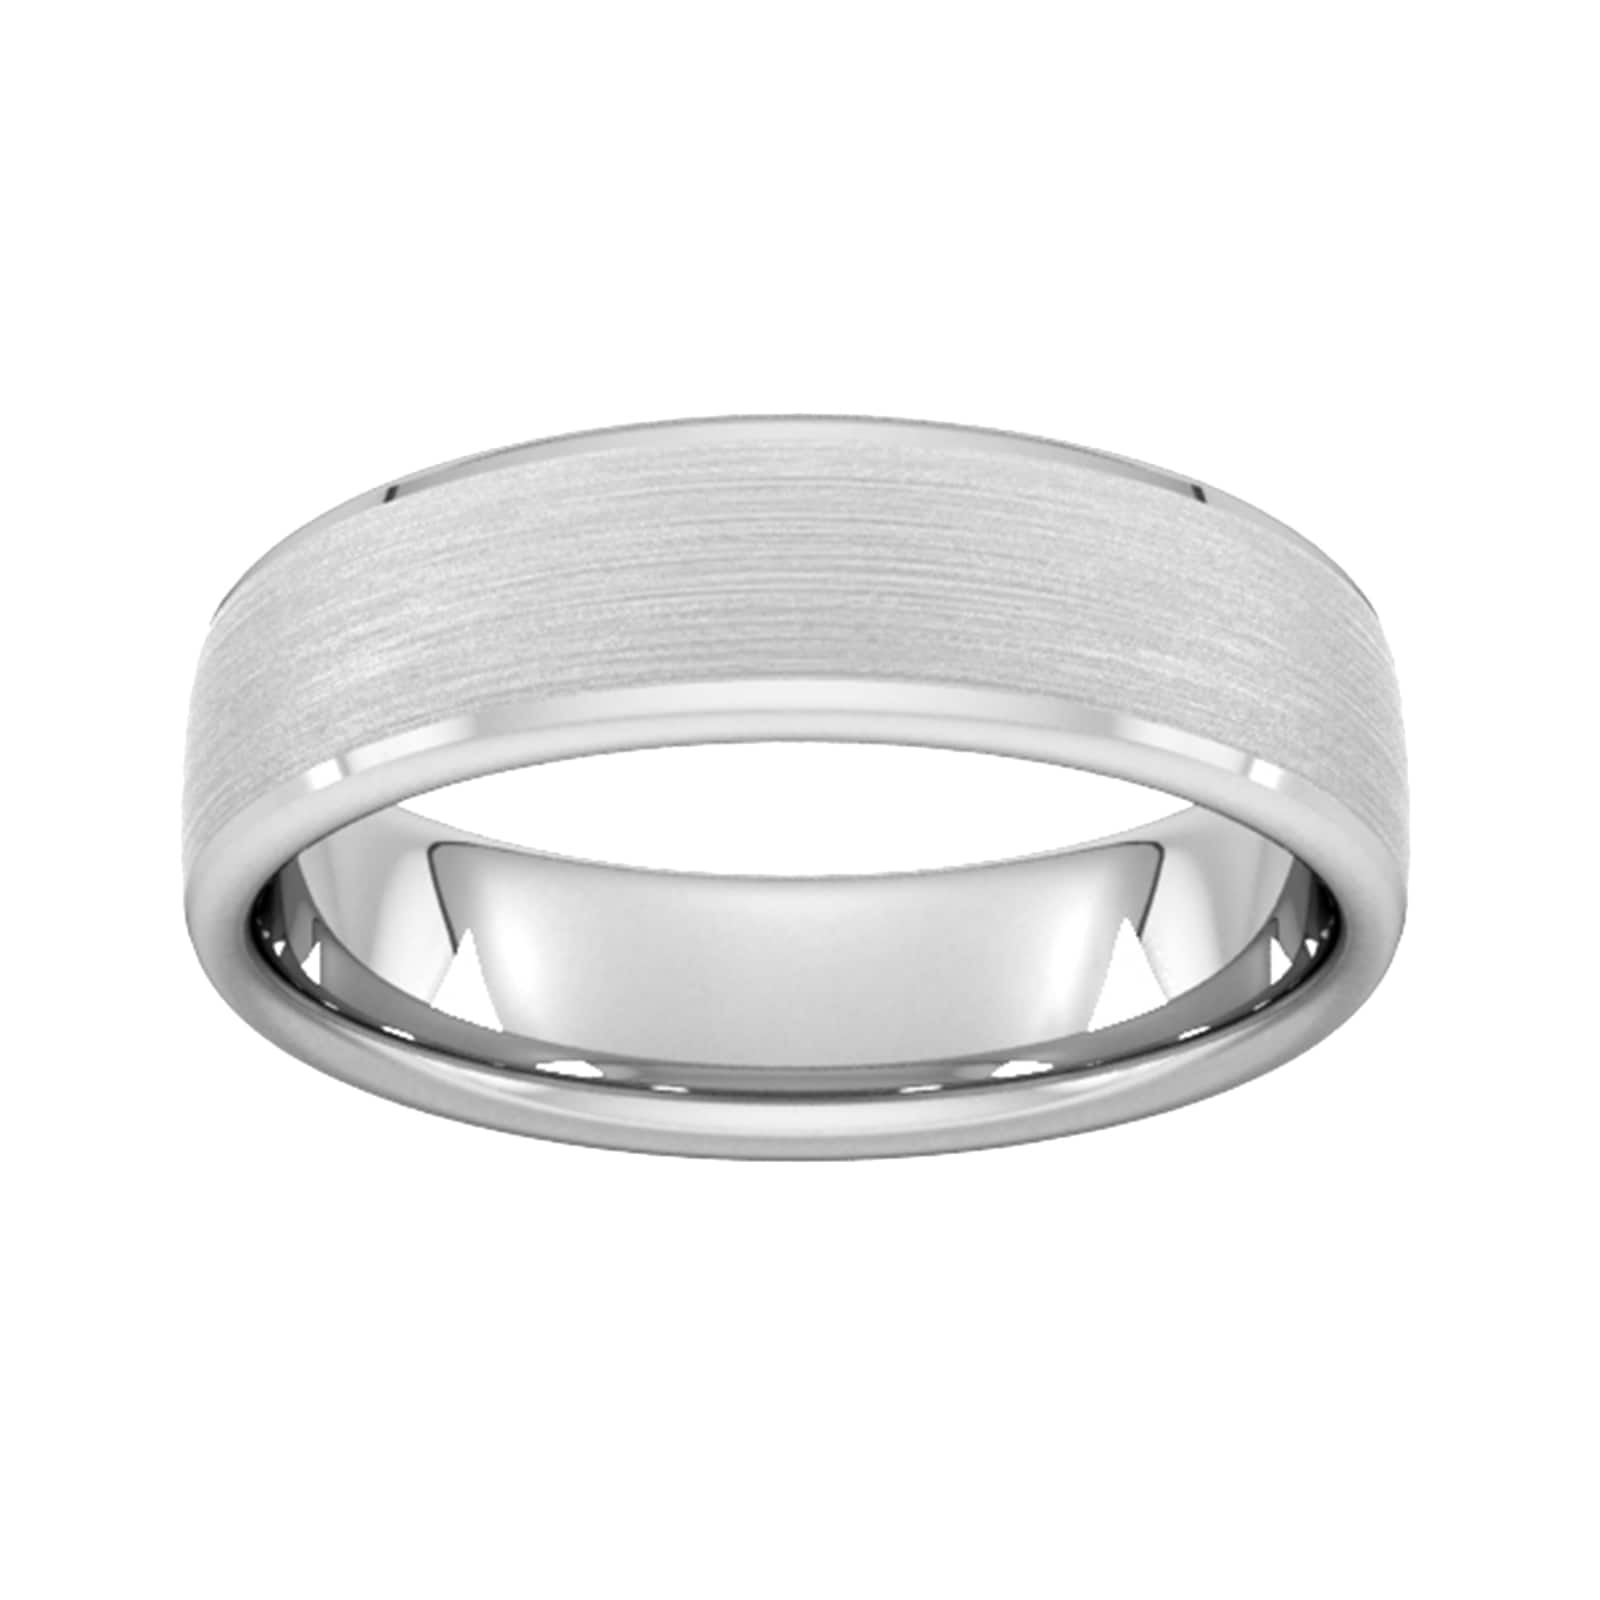 6mm D Shape Standard Polished Chamfered Edges With Matt Centre Wedding Ring In 950 Palladium - Ring Size L